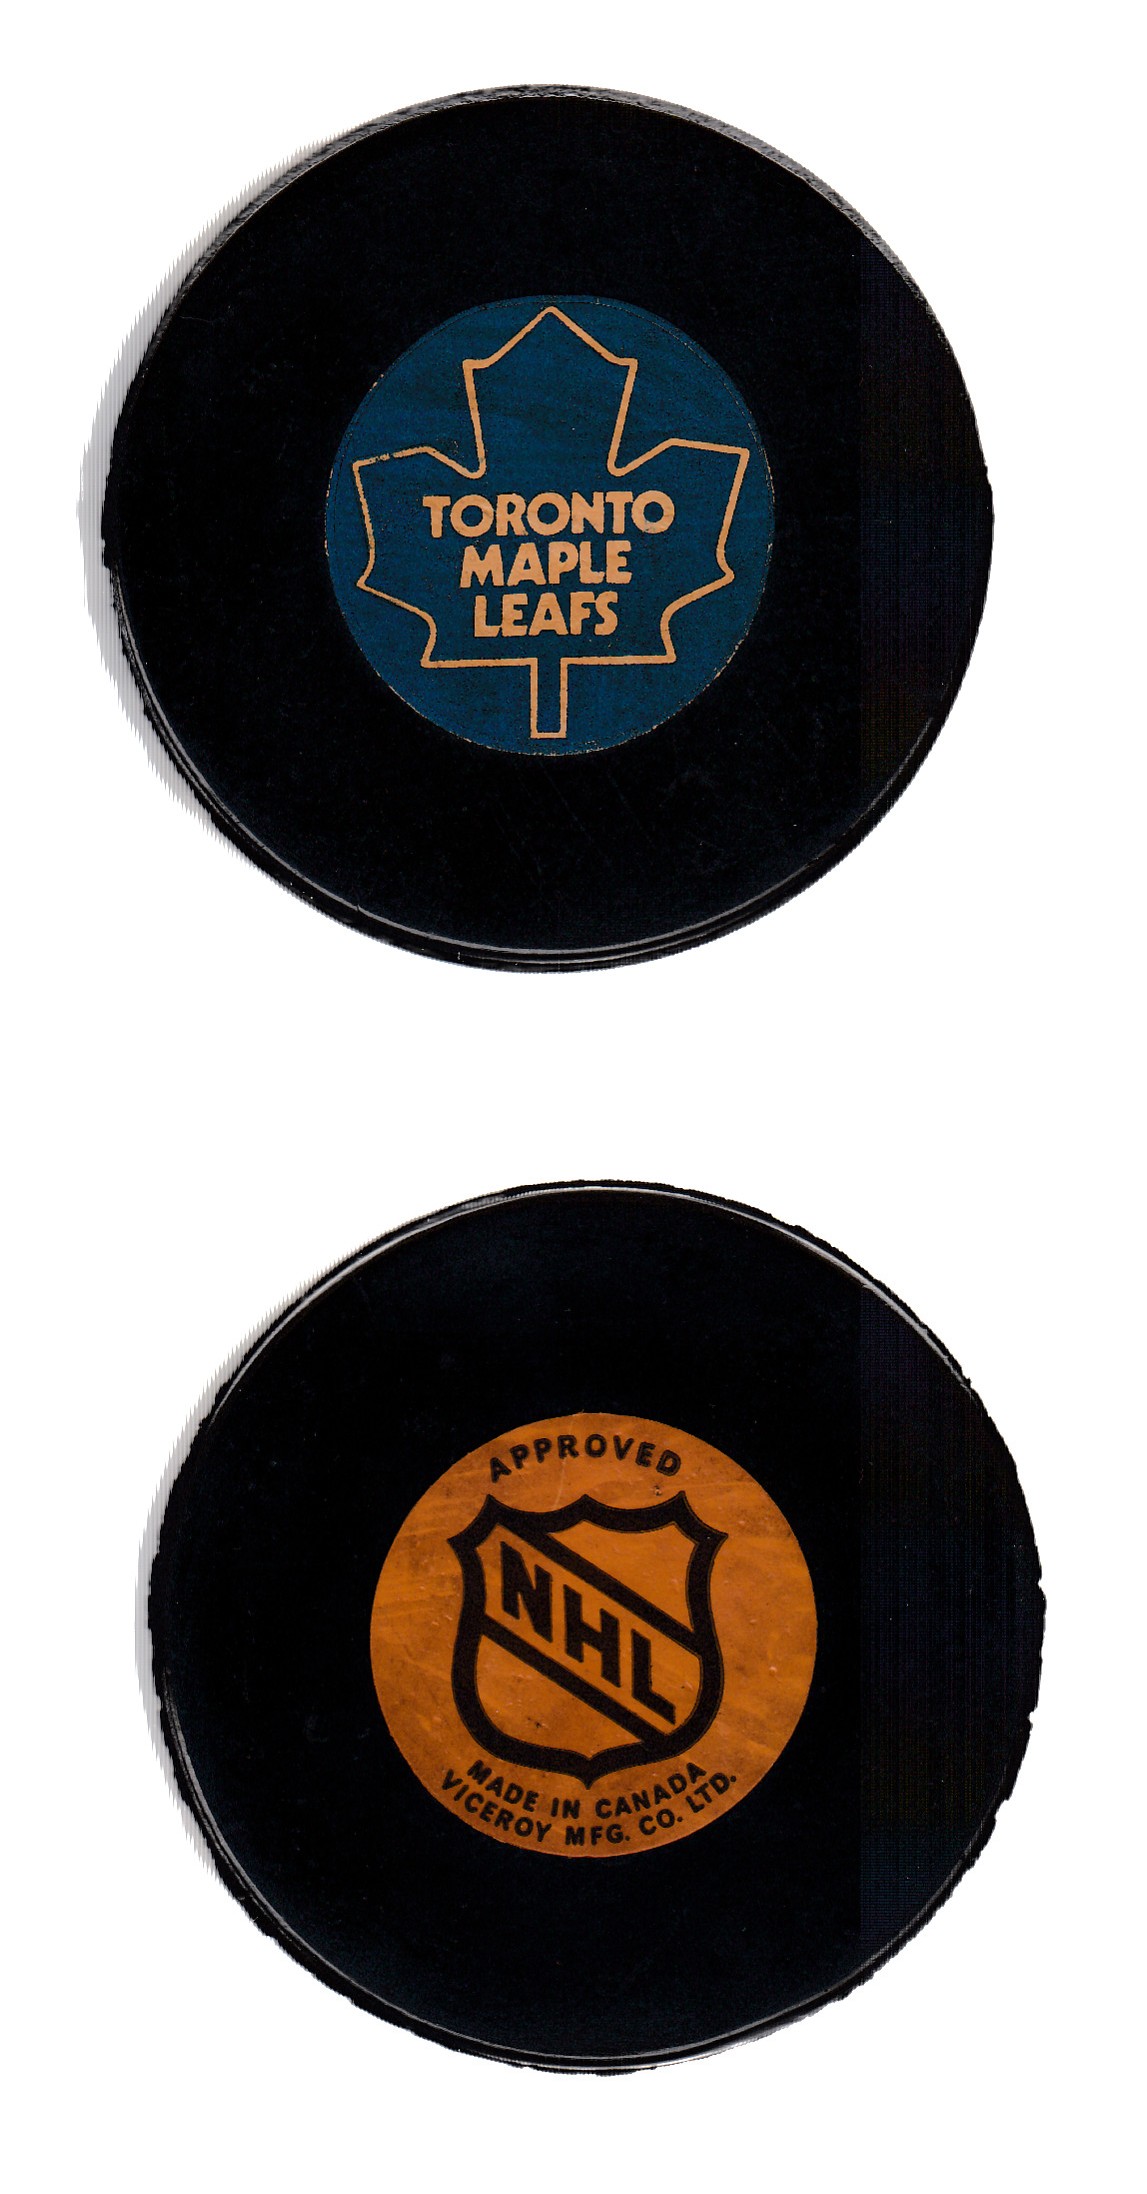 1973-75 VICEROY TORONTO MAPLE LEAFS GAME PUCK photo